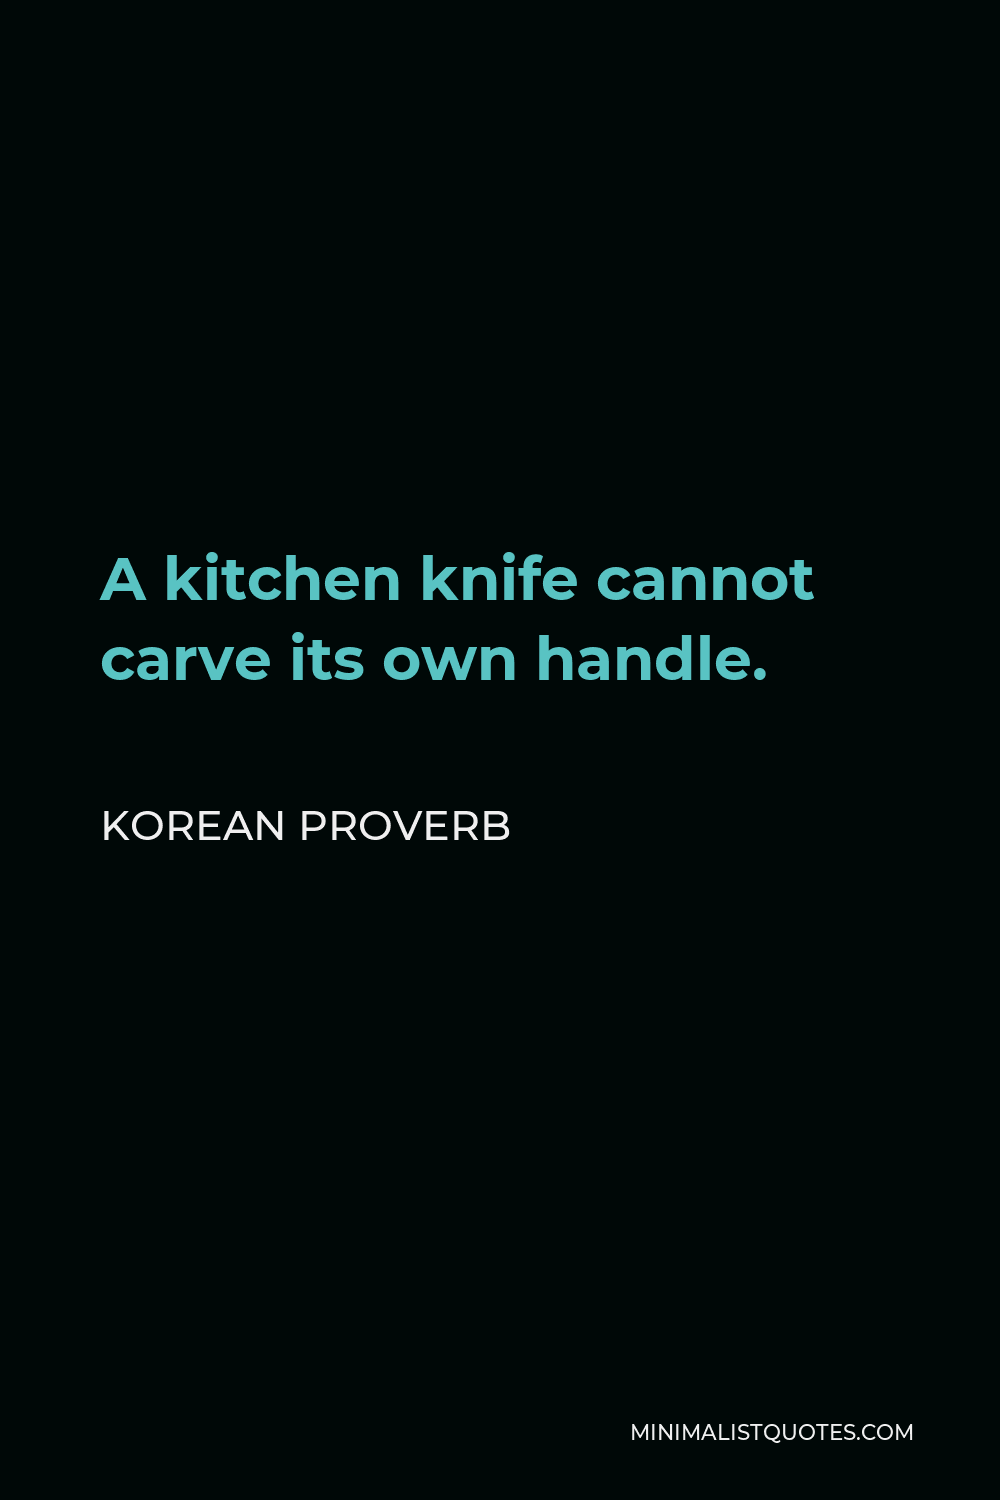 Korean Proverb Quote - A kitchen knife cannot carve its own handle.